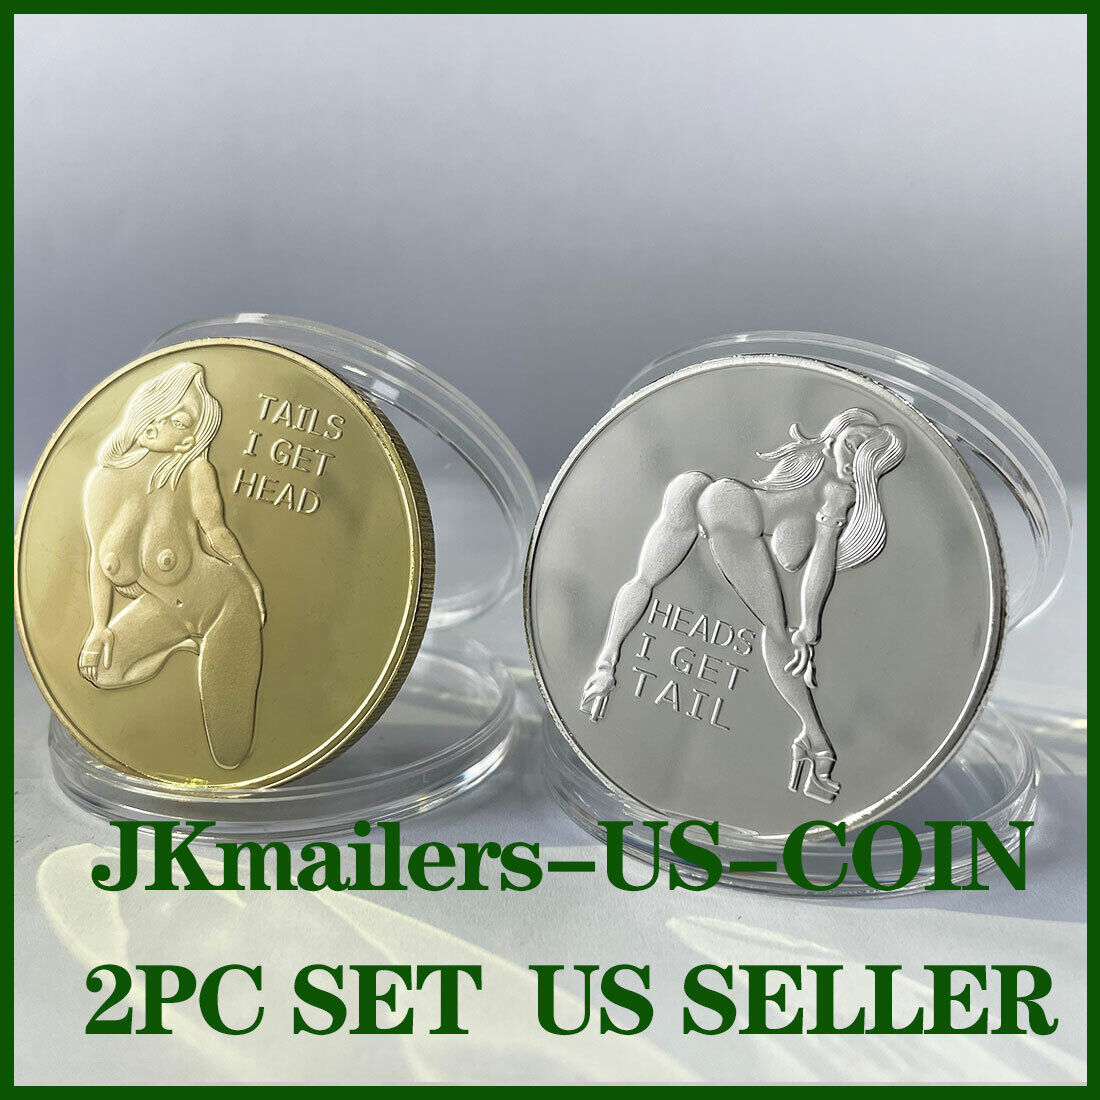 Tails I Get Head  Sexy Heads Tails Challenge Token Coin US 2PCS SET Gold&Silver